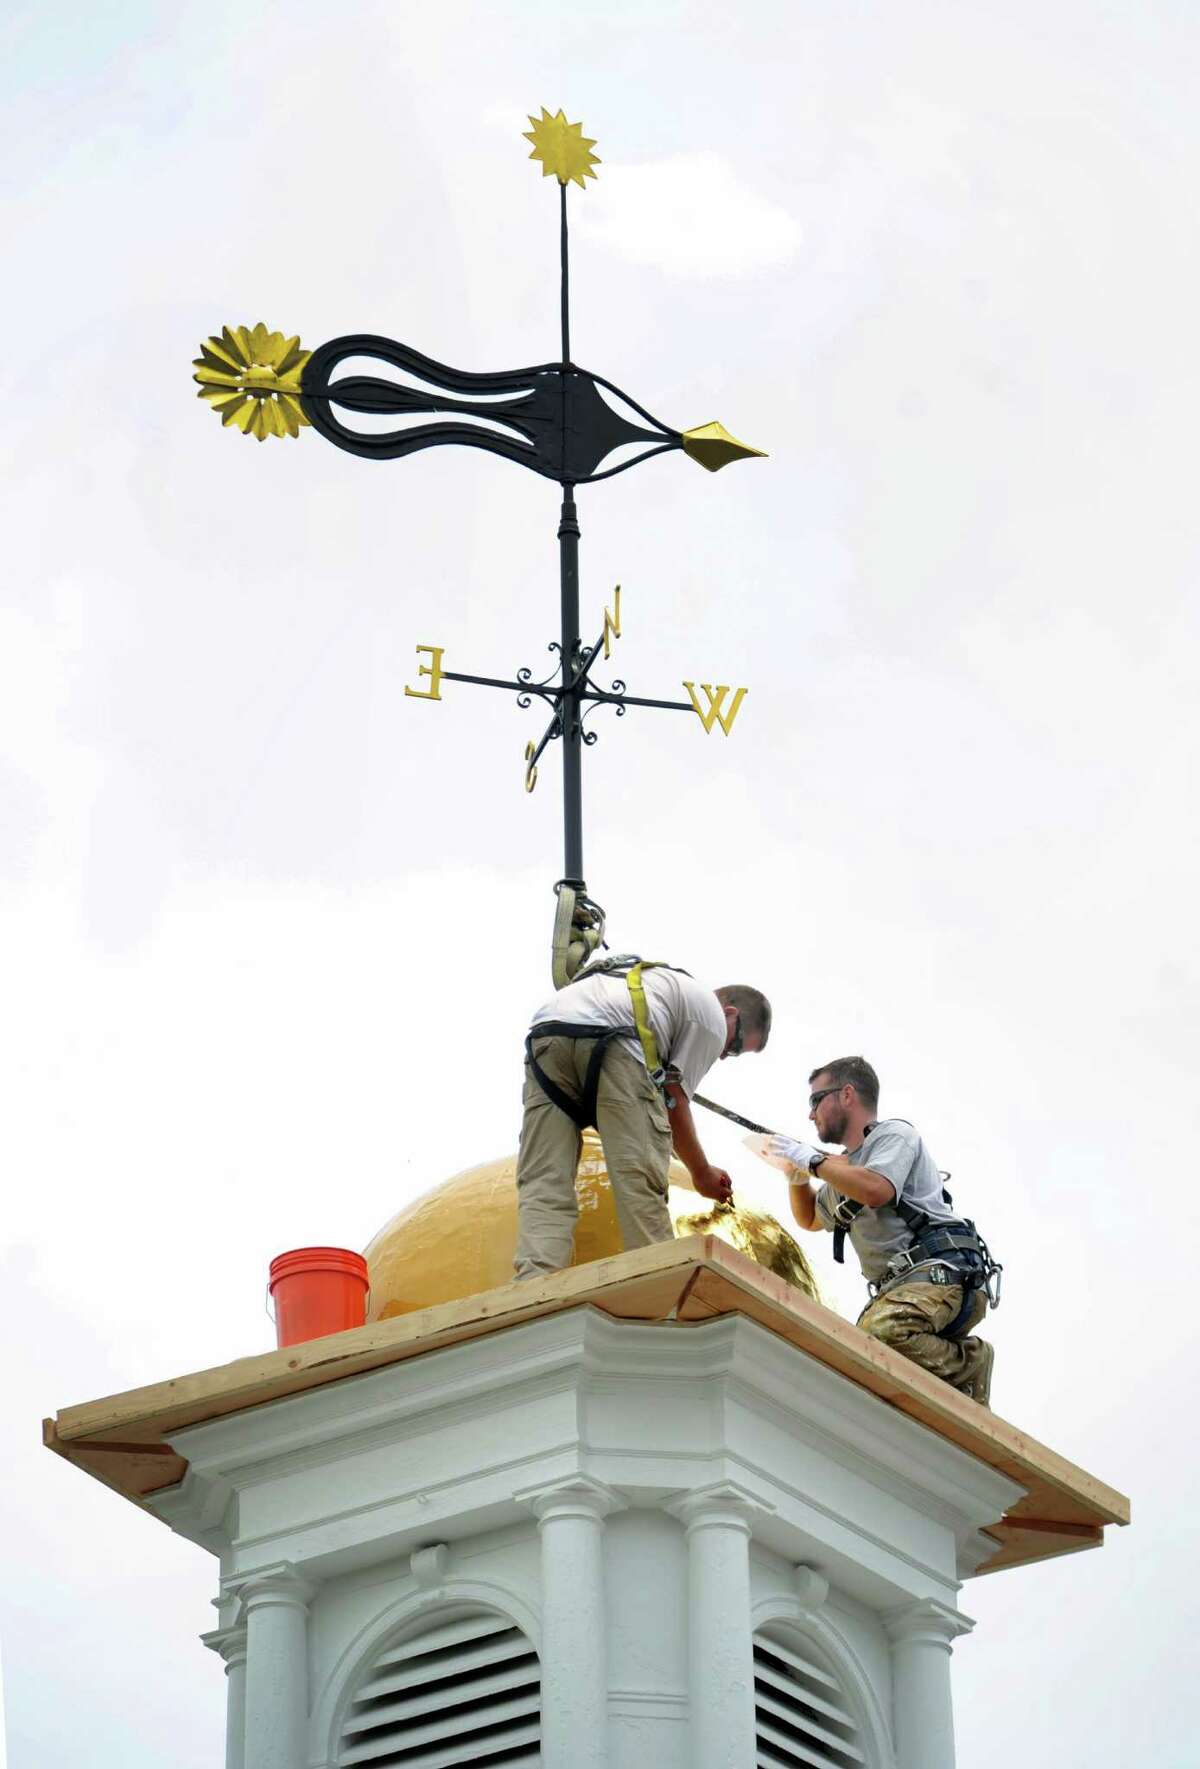 Paul Bastiaanse, left, and Dan Smith, Valley Restoration of Torrington, Conn., work on the cupola at the Edmond Town Hall in Newtown, Conn., Wednesday, July 10, 2013.